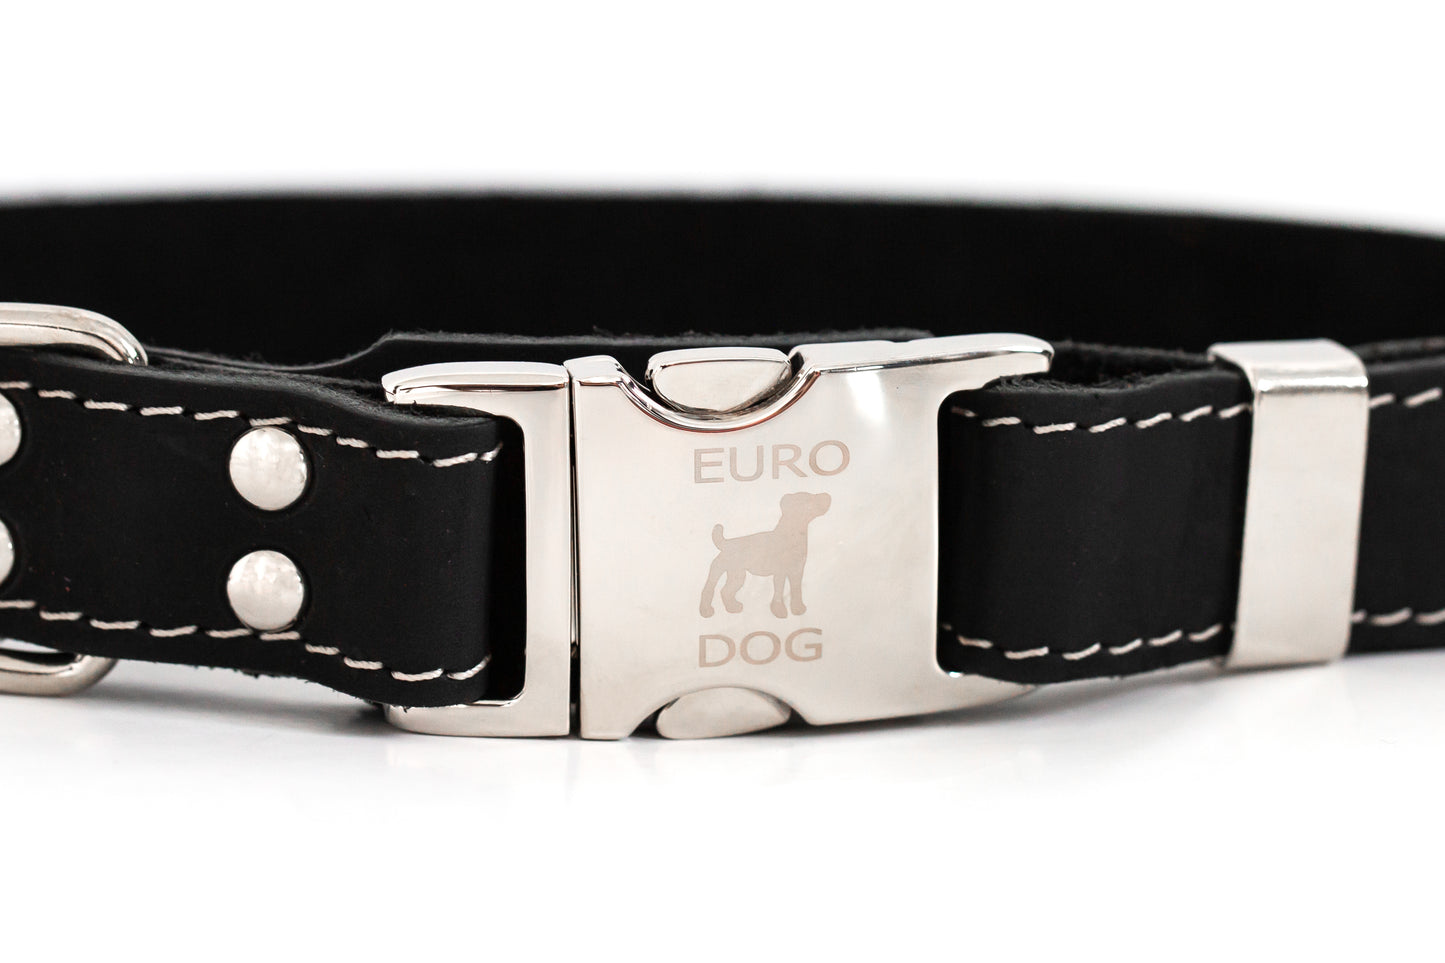 Bestseller Quick-Release Midnight Black Leather Dog Collar with Metal Buckle